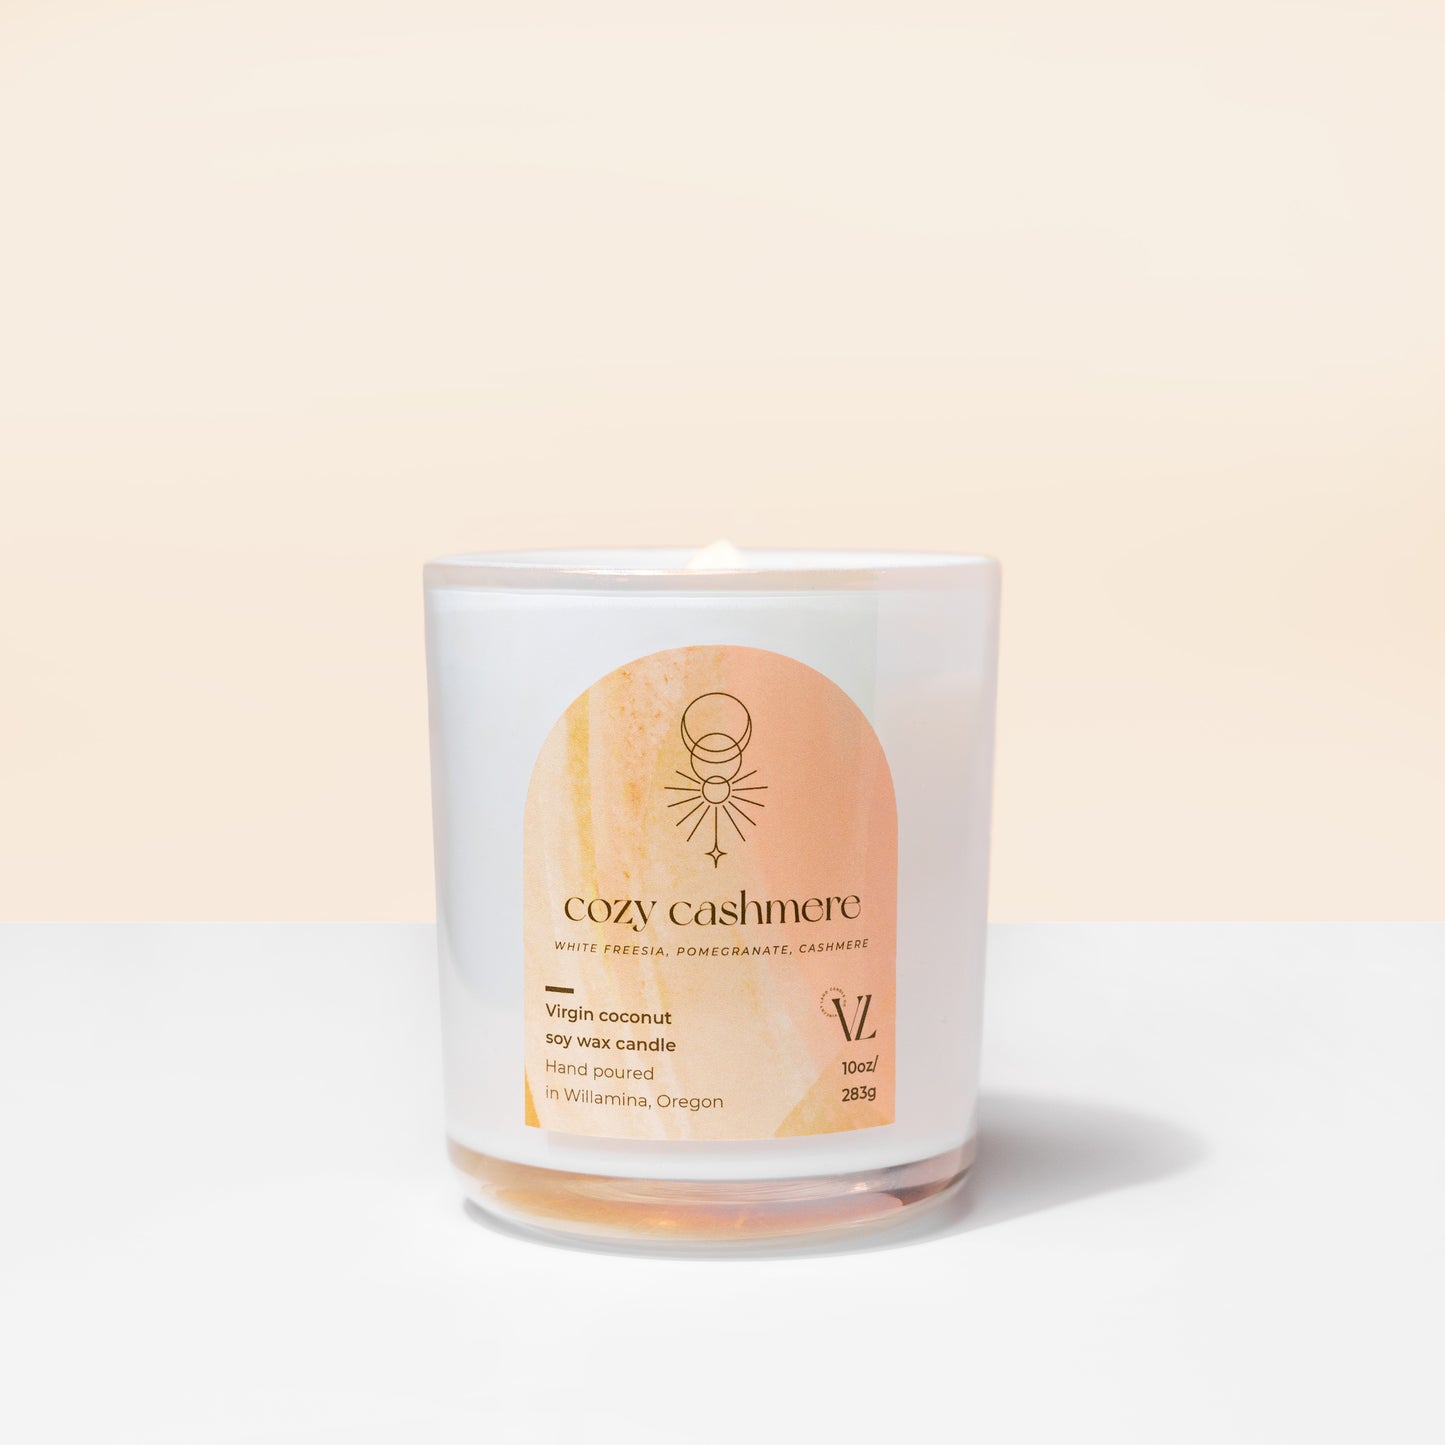 Cozy cashmere coconut soy wax candle | white freesia, pomegranate, cashmere